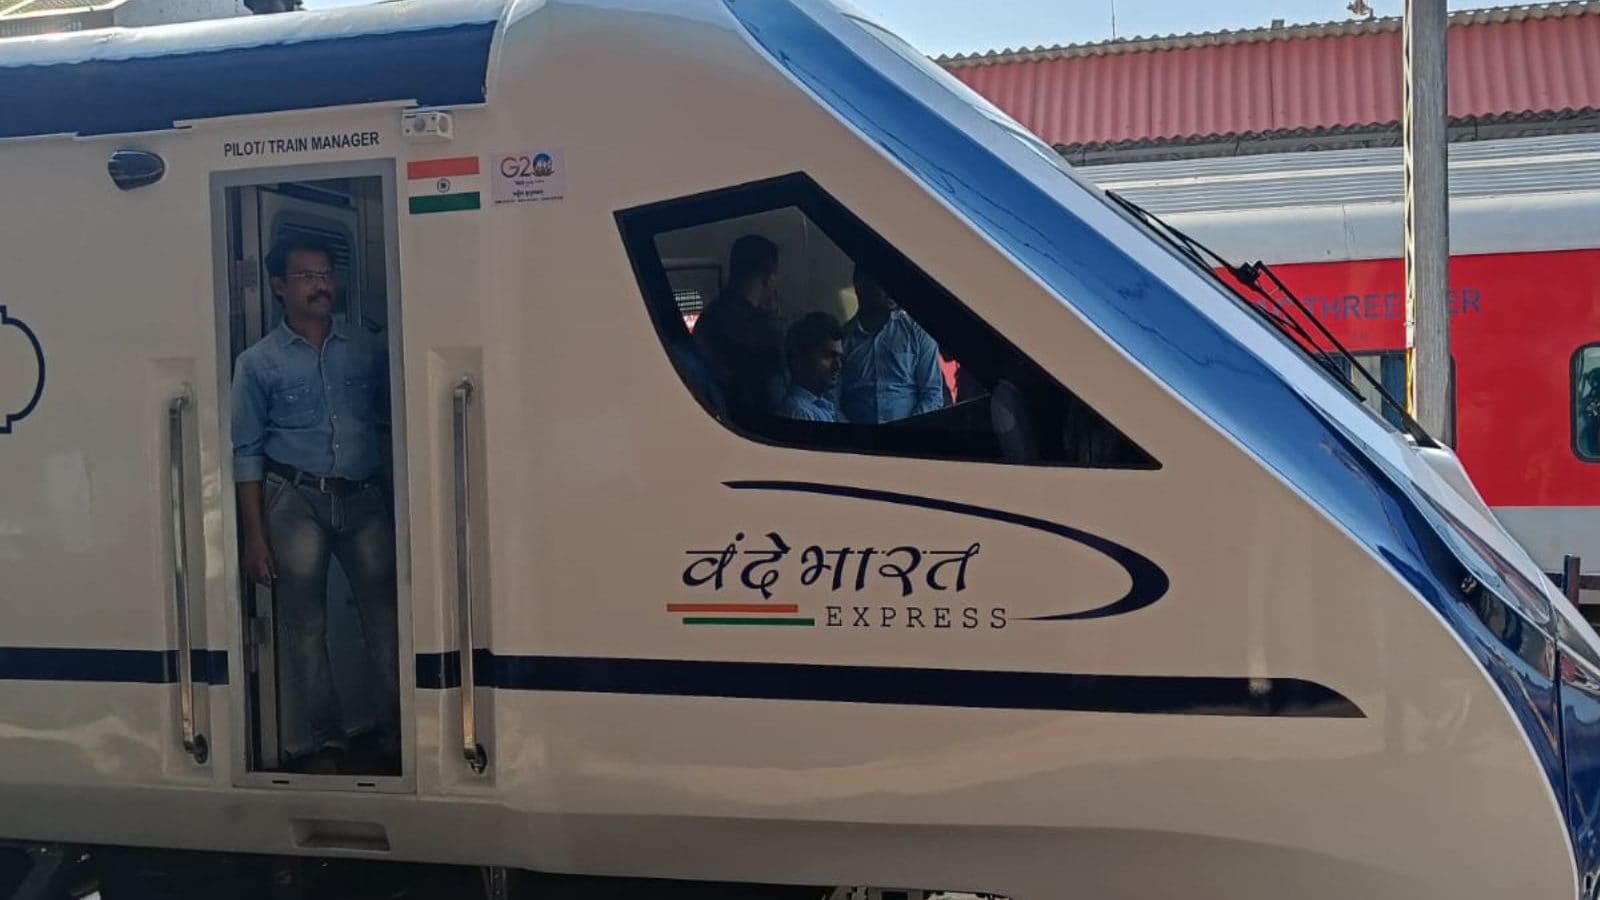 Vande Bharat: PM Modi to Launch Two More Trains from Mumbai, Maharashtra’s Count Touches 4